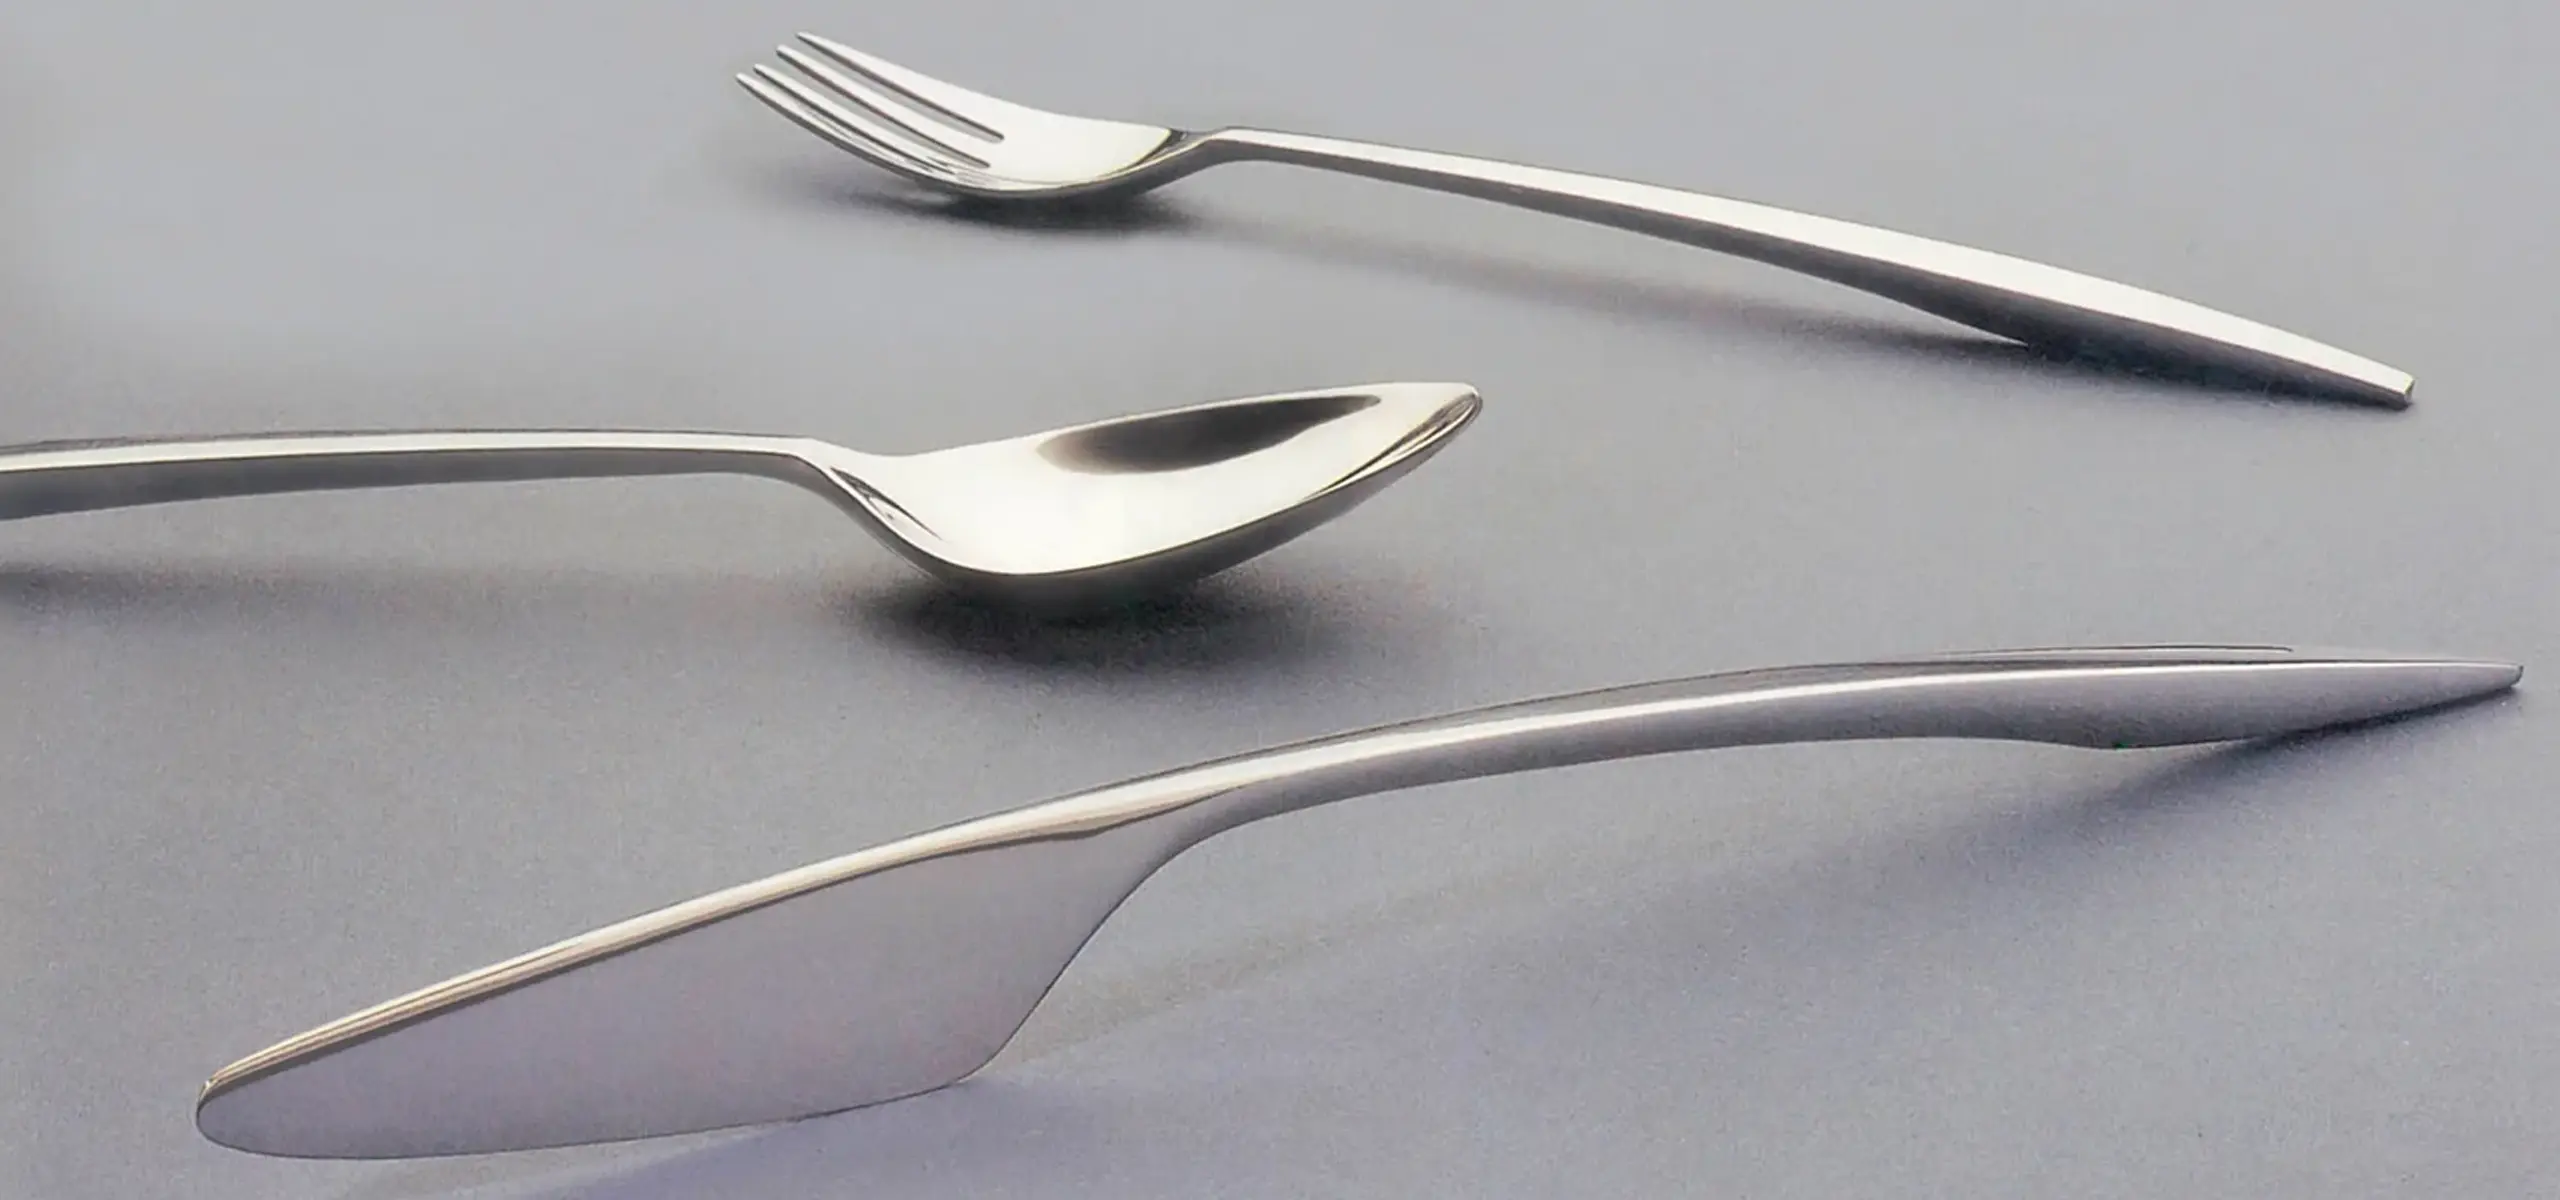 cutlery picasso design by Hanno Groen